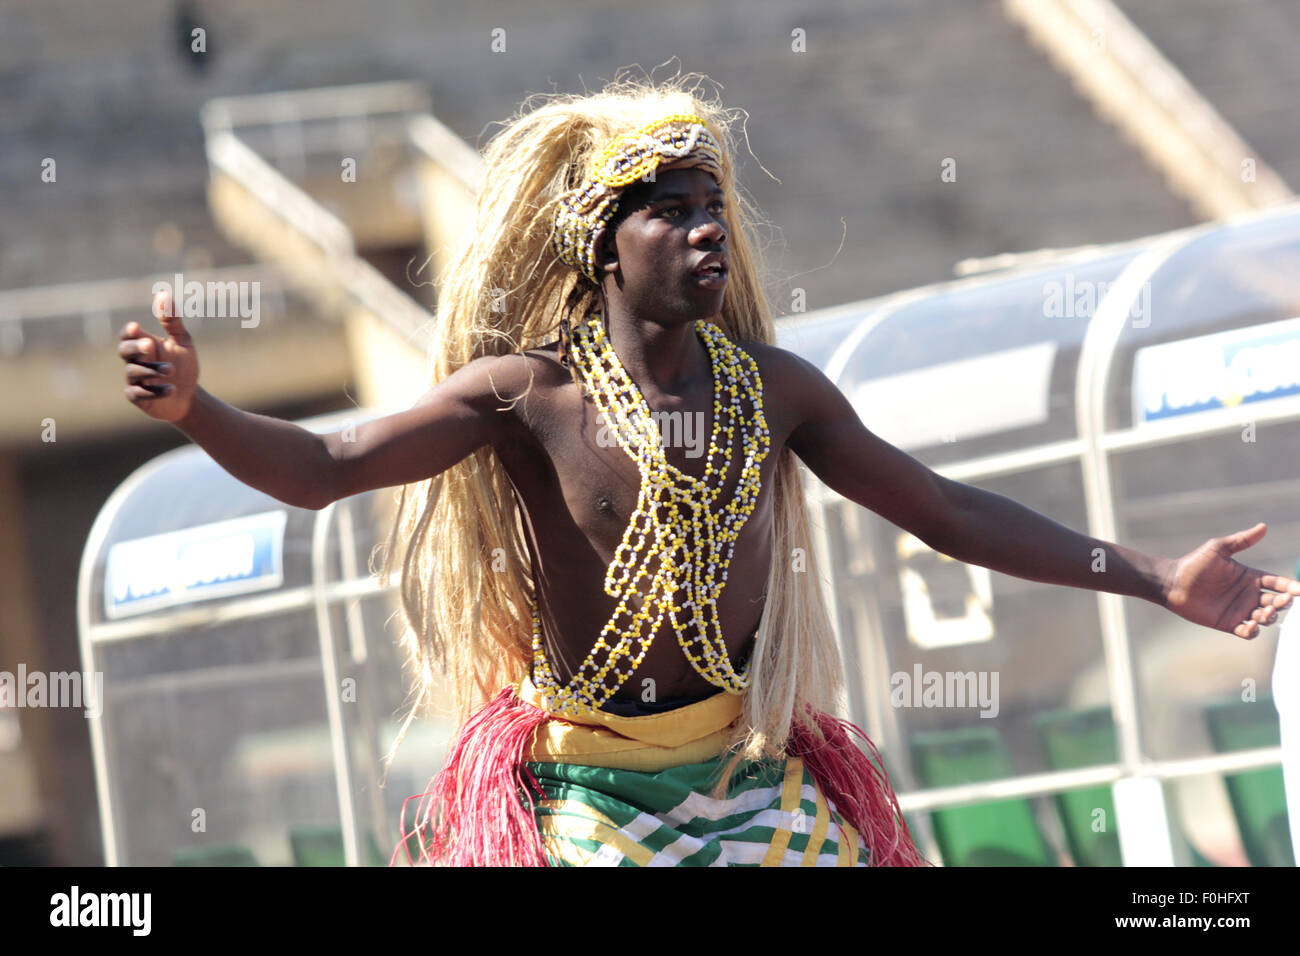 Kampala, Uganda. 16th August, 2015. Burundi traditional dancers perform during the launch of the East Africa Military Games in Uganda. The annual games meant to foster cooperation and regional integration involve armed forces from Rwanda, Burundi, Kenya, Tanzania and Uganda. Credit:  Samson Opus/Alamy Live News Stock Photo